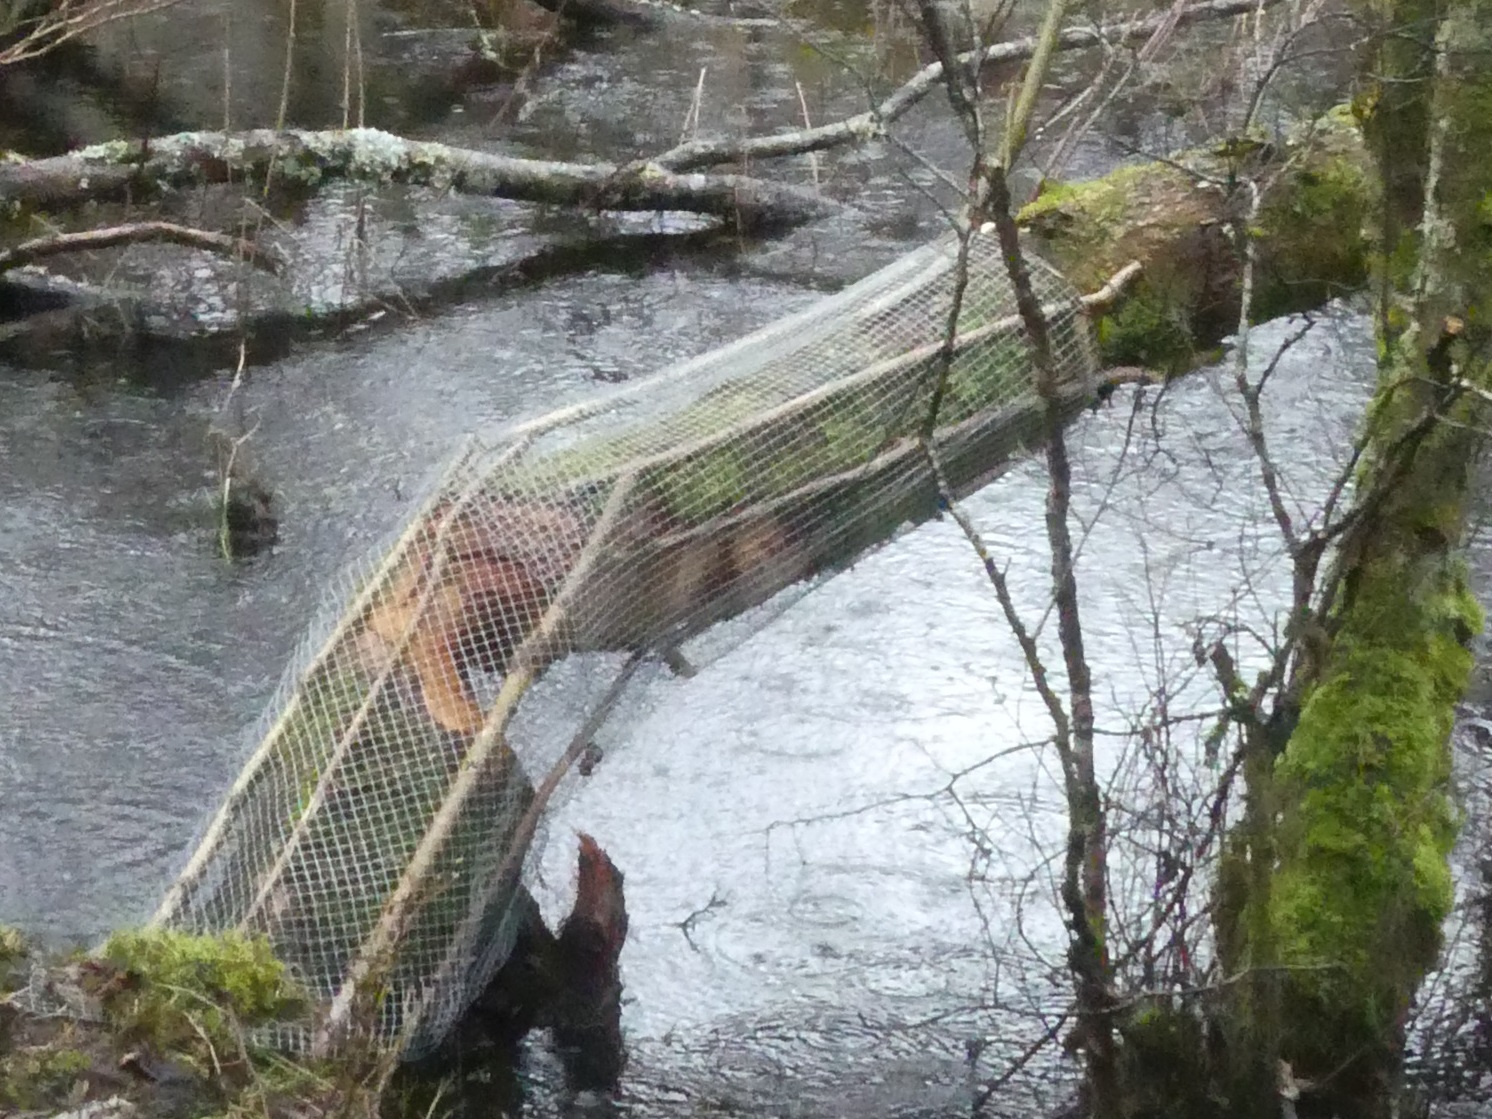 Beaver tree protection at Knapdale (Chris Cant)